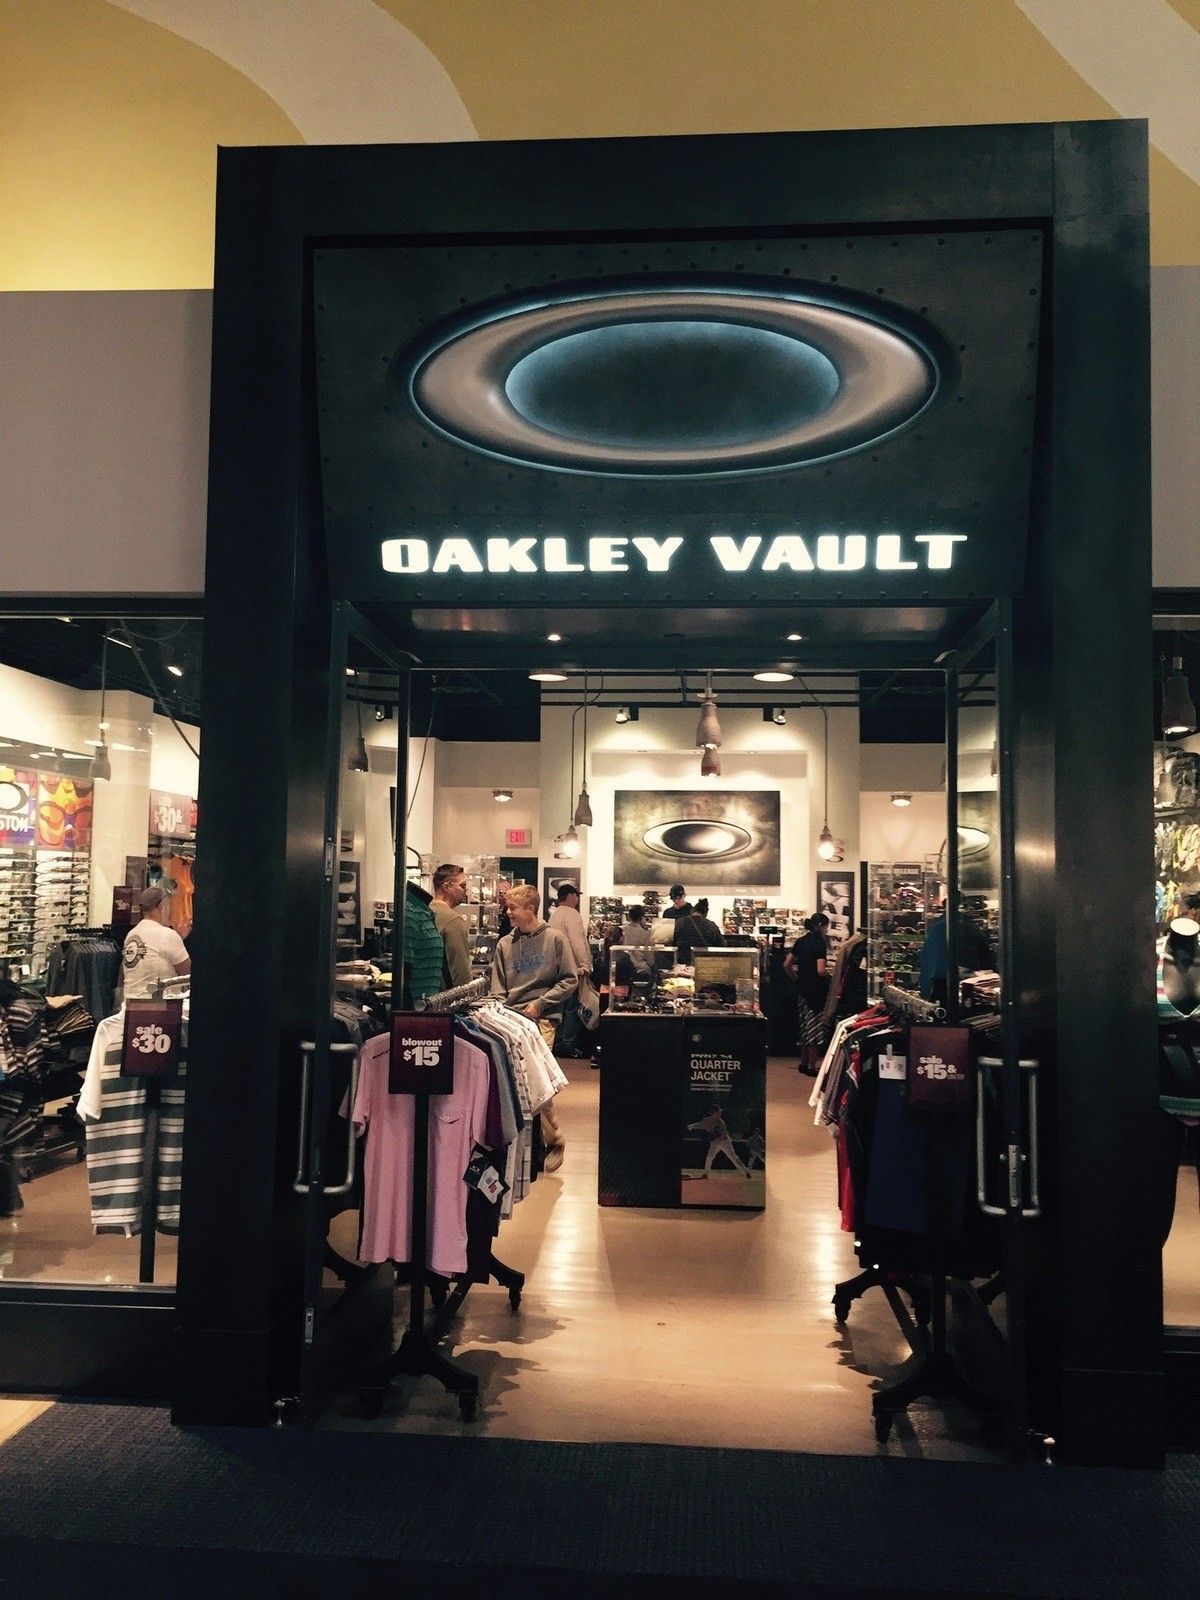 What are Oakley Vault locations?